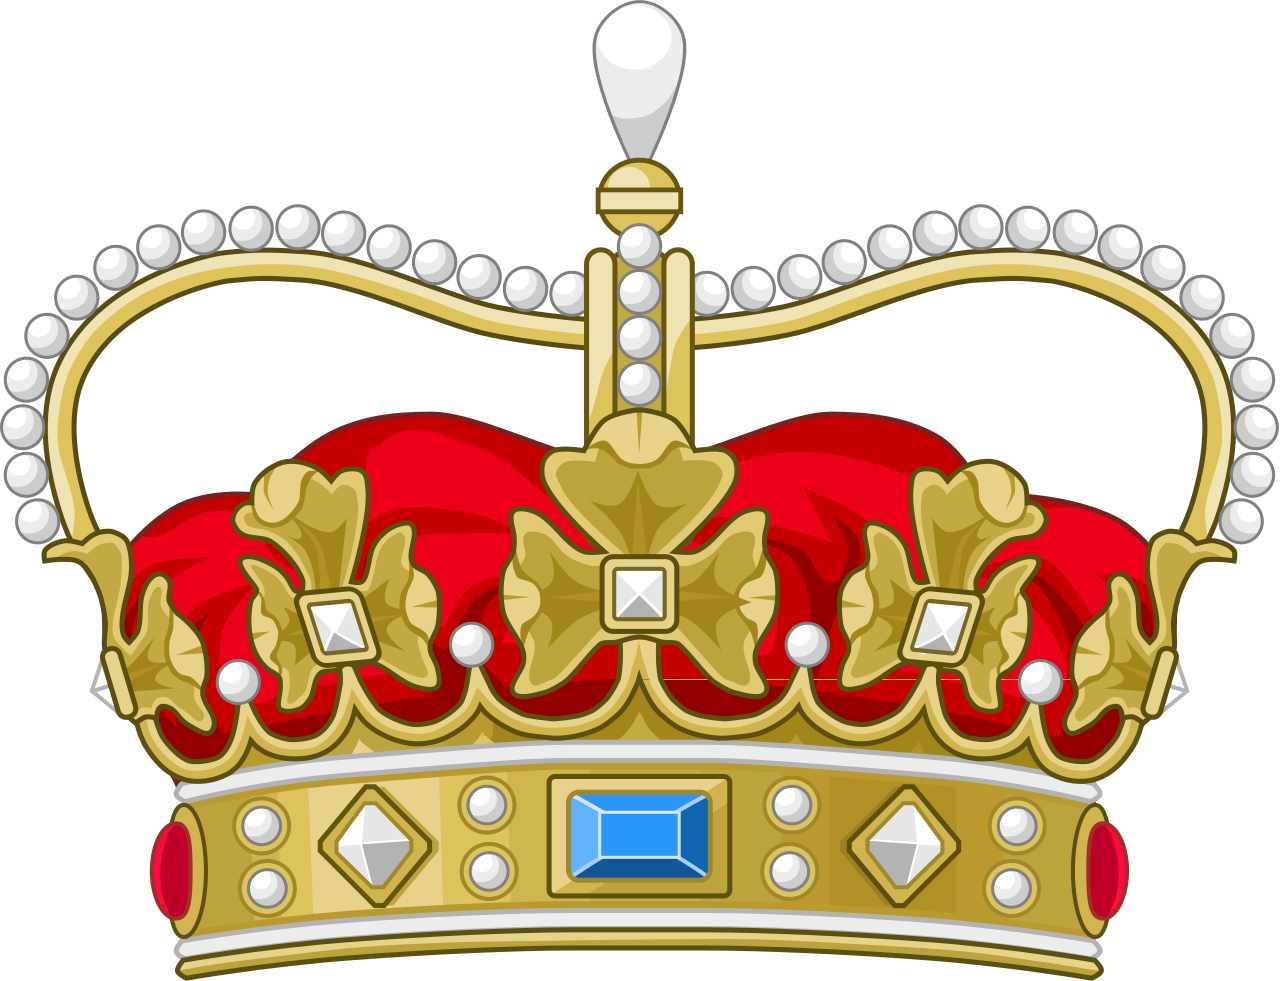 Crown Of A Prince Of Denmark - Denmark Coat Of Arms Oval Car Magnet (1280x981)